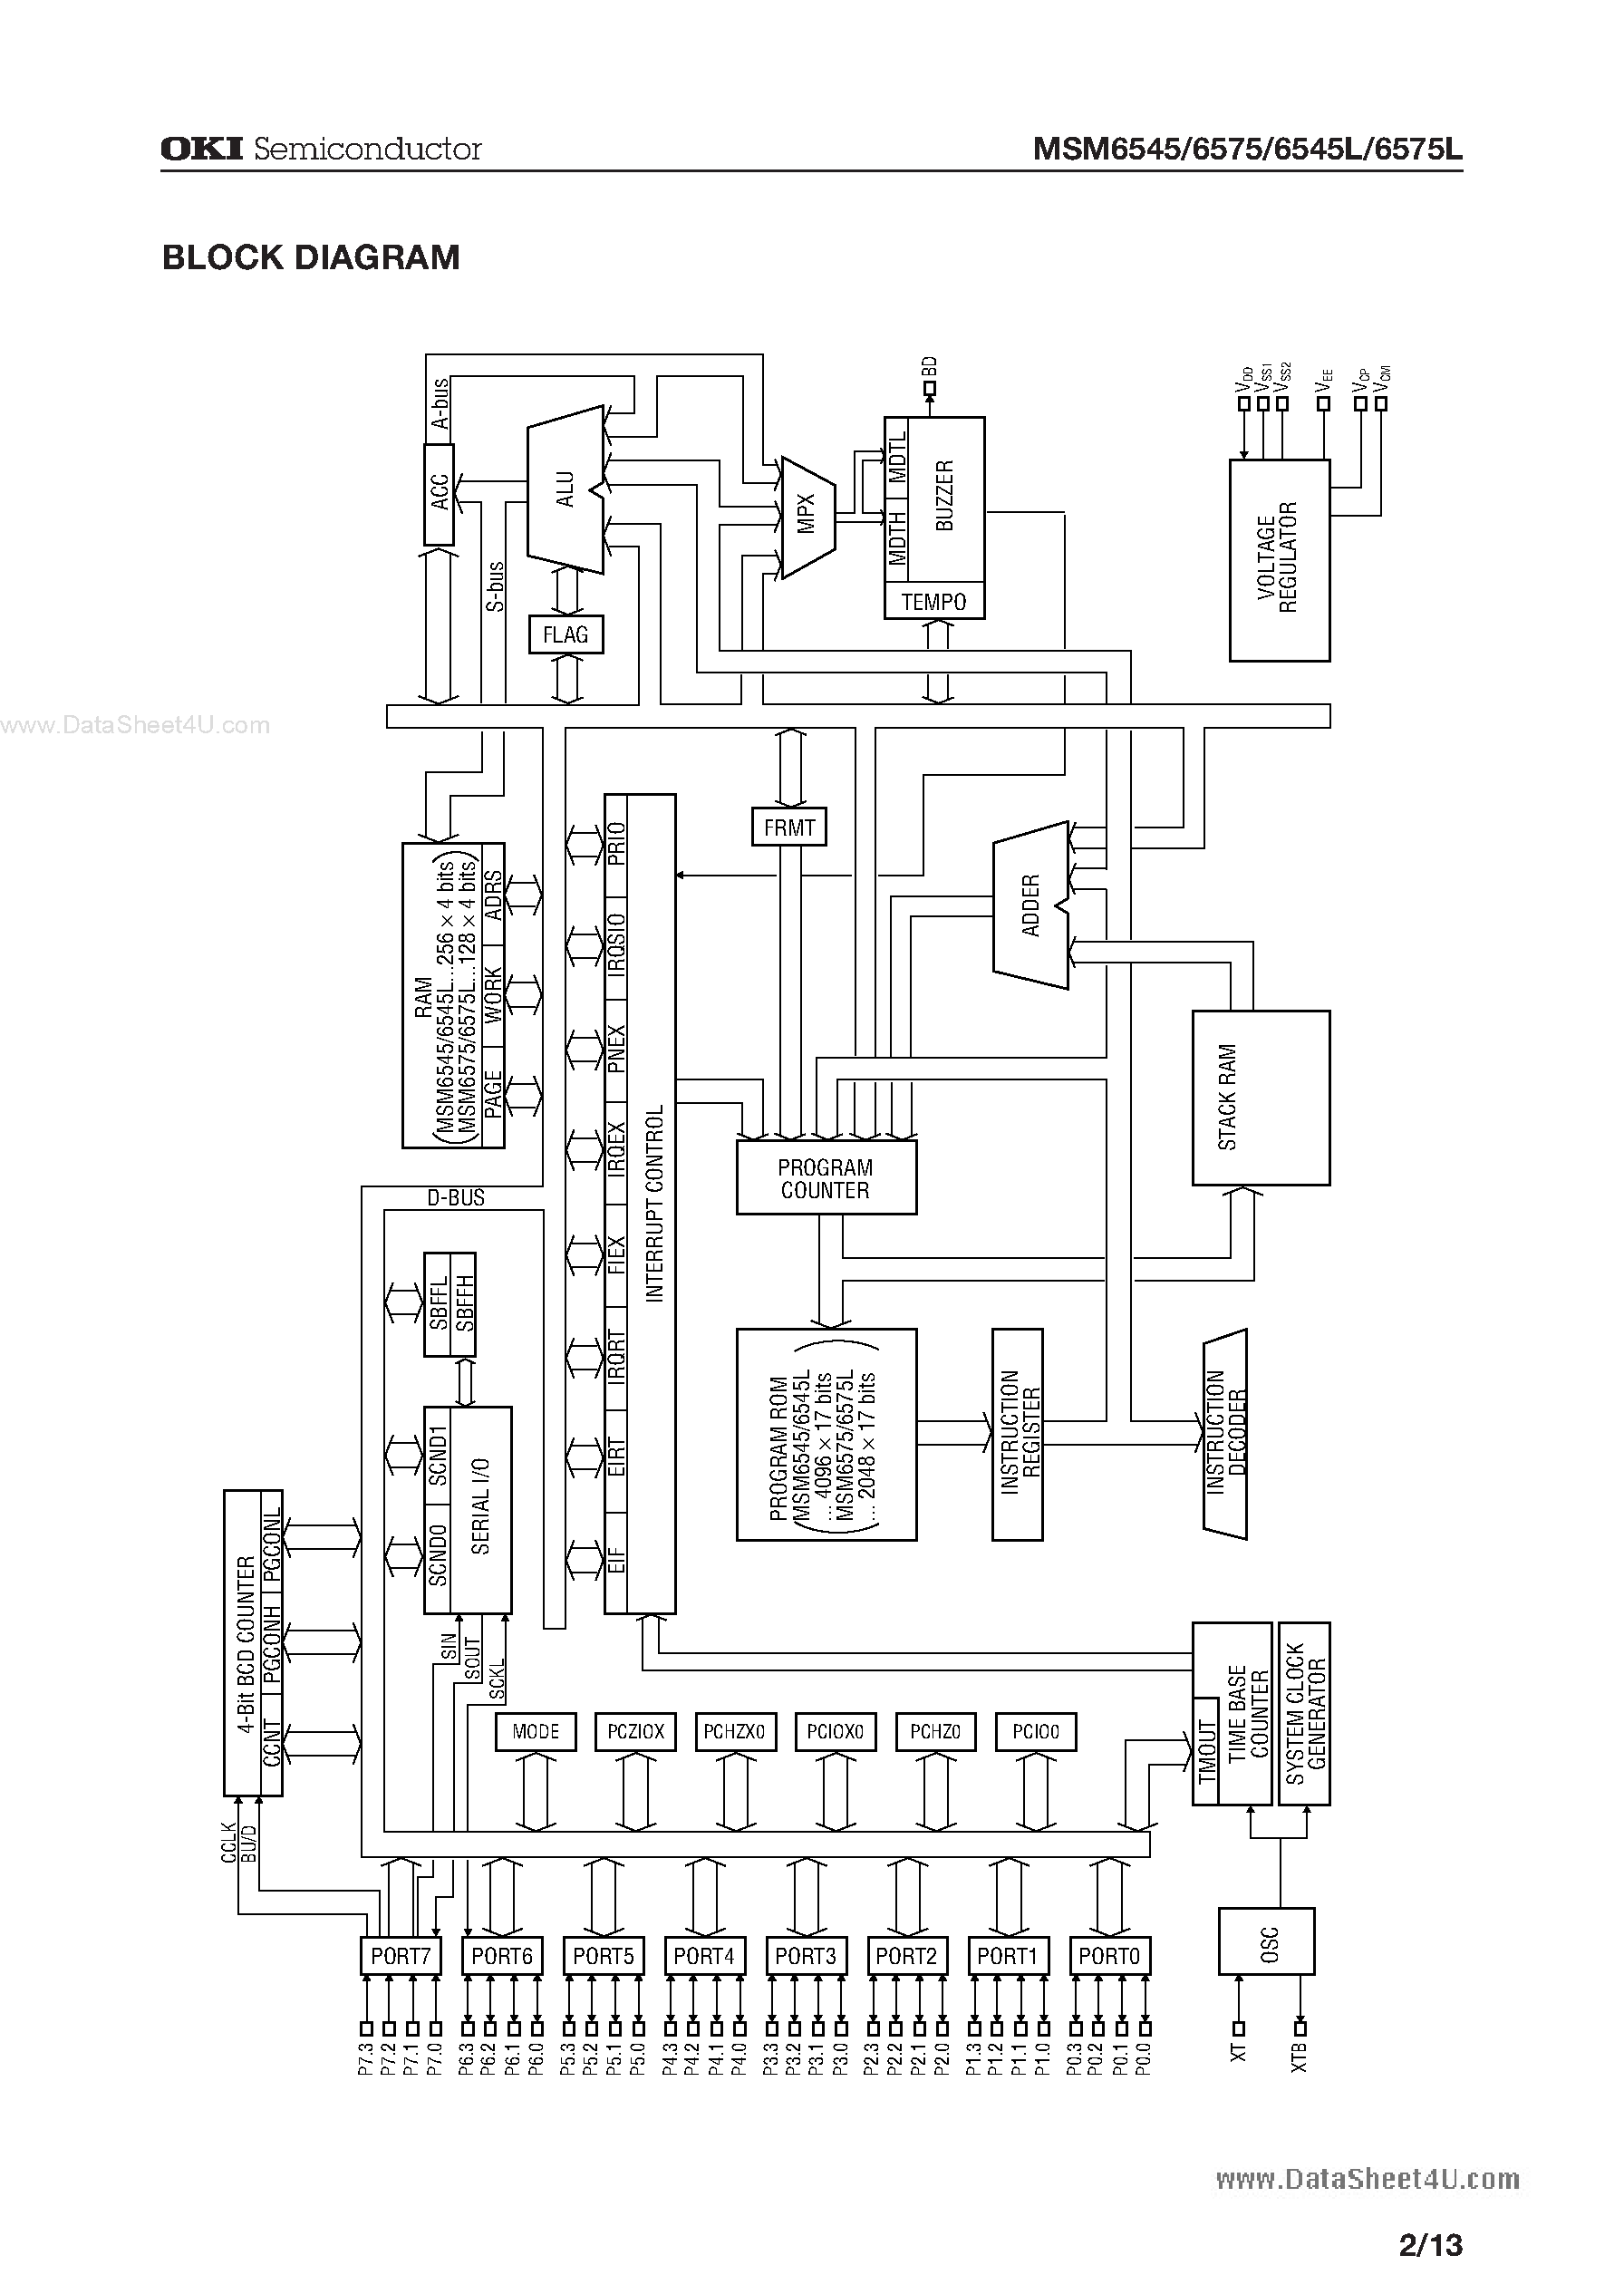 Datasheet MSM6545 - (MSM6545 / MSM6575) Operatable at 0.9 V and Built-in Buzzer Circuit 4-Bit Microcontroller page 2